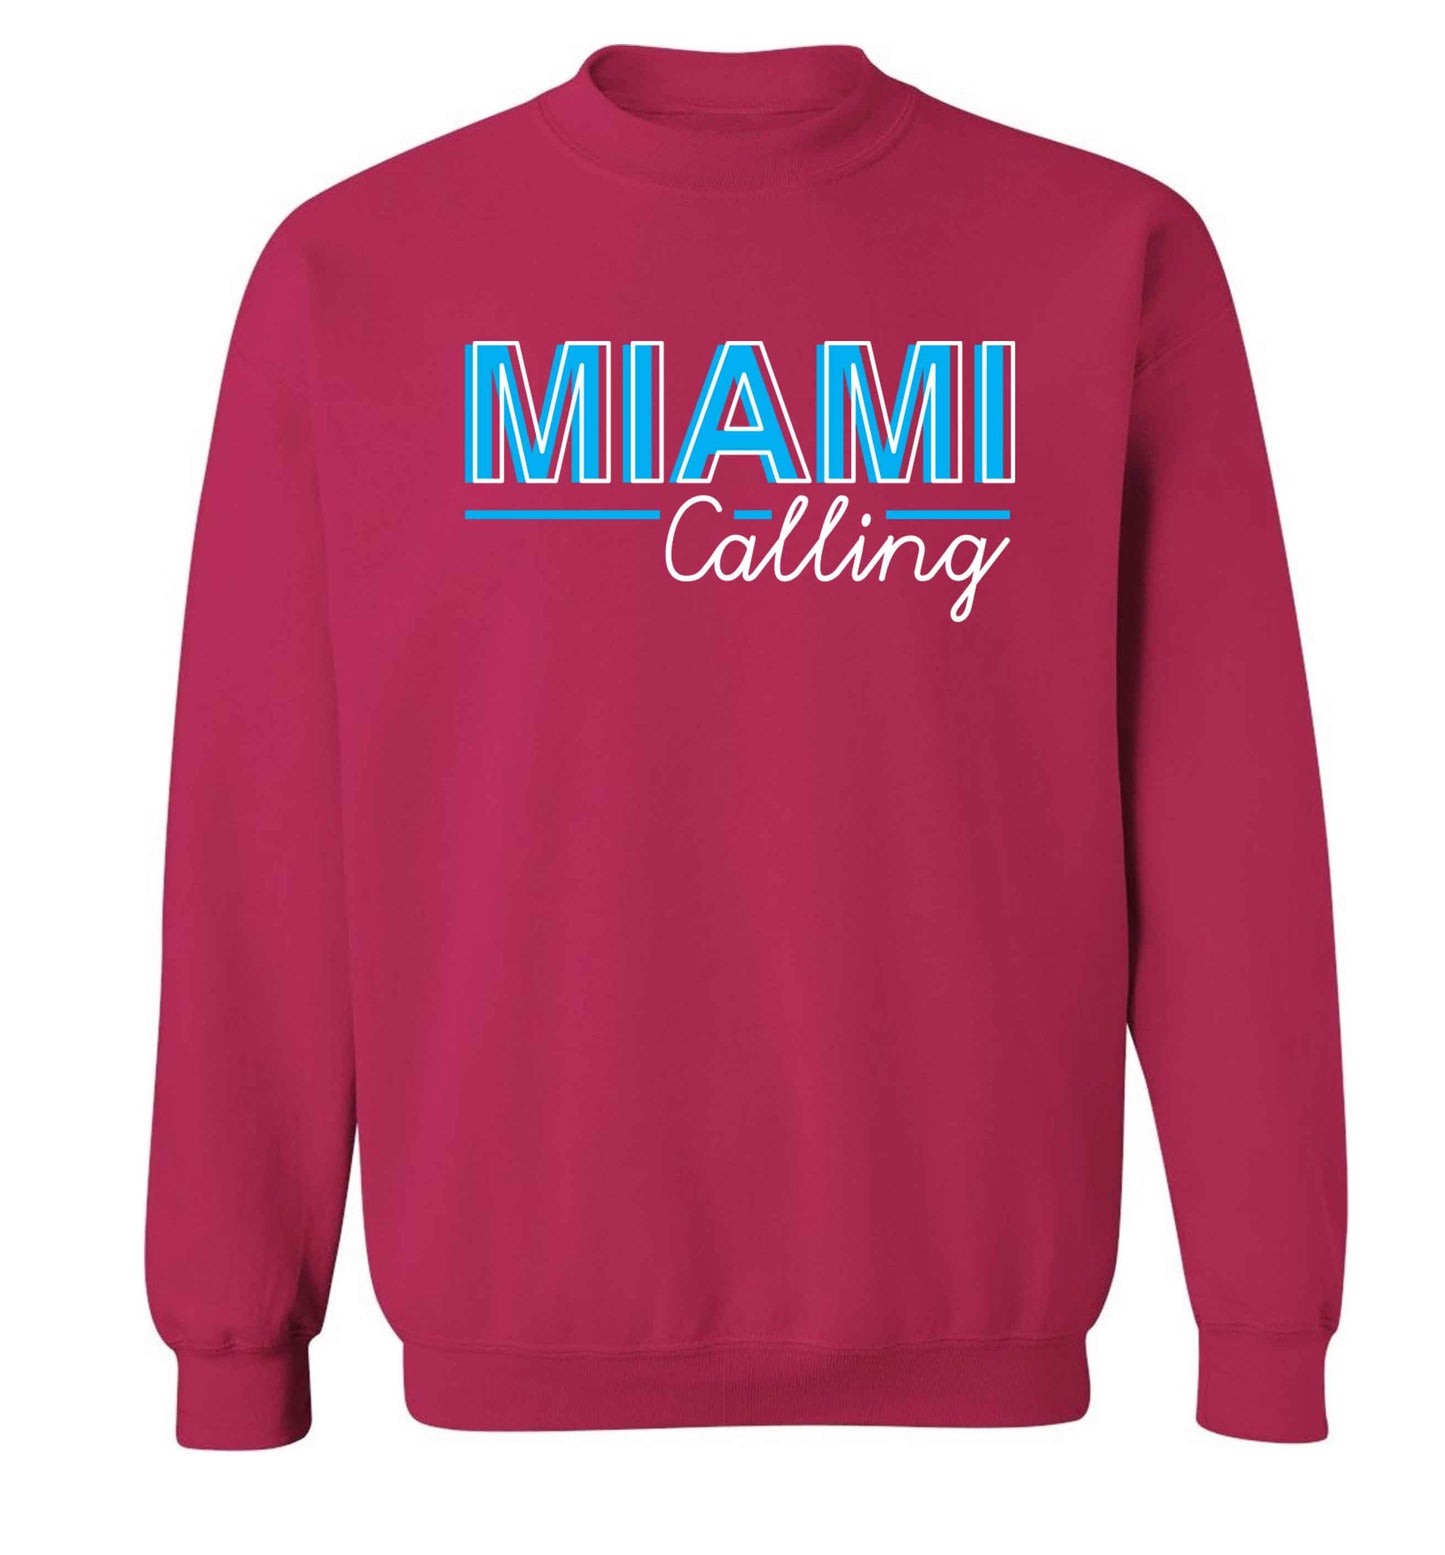 Miami calling Adult's unisex pink Sweater 2XL